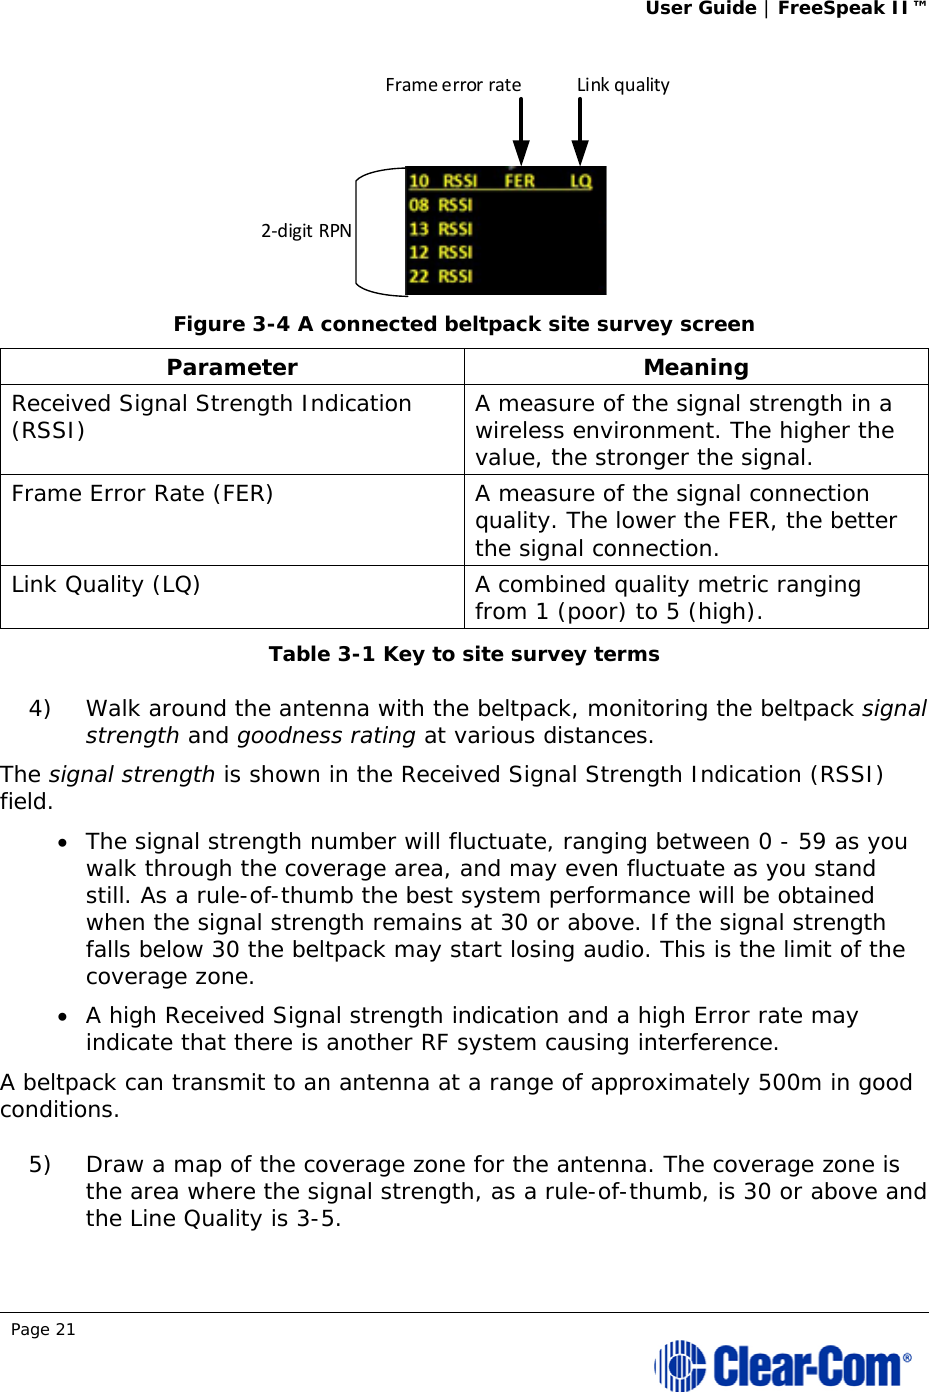 User Guide | FreeSpeak II™  Page 21   Figure 3-4 A connected beltpack site survey screen Parameter Meaning Received Signal Strength Indication (RSSI)  A measure of the signal strength in a wireless environment. The higher the value, the stronger the signal. Frame Error Rate (FER)  A measure of the signal connection quality. The lower the FER, the better the signal connection. Link Quality (LQ)  A combined quality metric ranging from 1 (poor) to 5 (high). Table 3-1 Key to site survey terms 4) Walk around the antenna with the beltpack, monitoring the beltpack signal strength and goodness rating at various distances.  The signal strength is shown in the Received Signal Strength Indication (RSSI) field.   The signal strength number will fluctuate, ranging between 0 - 59 as you walk through the coverage area, and may even fluctuate as you stand still. As a rule-of-thumb the best system performance will be obtained when the signal strength remains at 30 or above. If the signal strength falls below 30 the beltpack may start losing audio. This is the limit of the coverage zone.   A high Received Signal strength indication and a high Error rate may indicate that there is another RF system causing interference. A beltpack can transmit to an antenna at a range of approximately 500m in good conditions. 5) Draw a map of the coverage zone for the antenna. The coverage zone is the area where the signal strength, as a rule-of-thumb, is 30 or above and the Line Quality is 3-5.  2‐digitRPNFrameerrorrate Linkquality